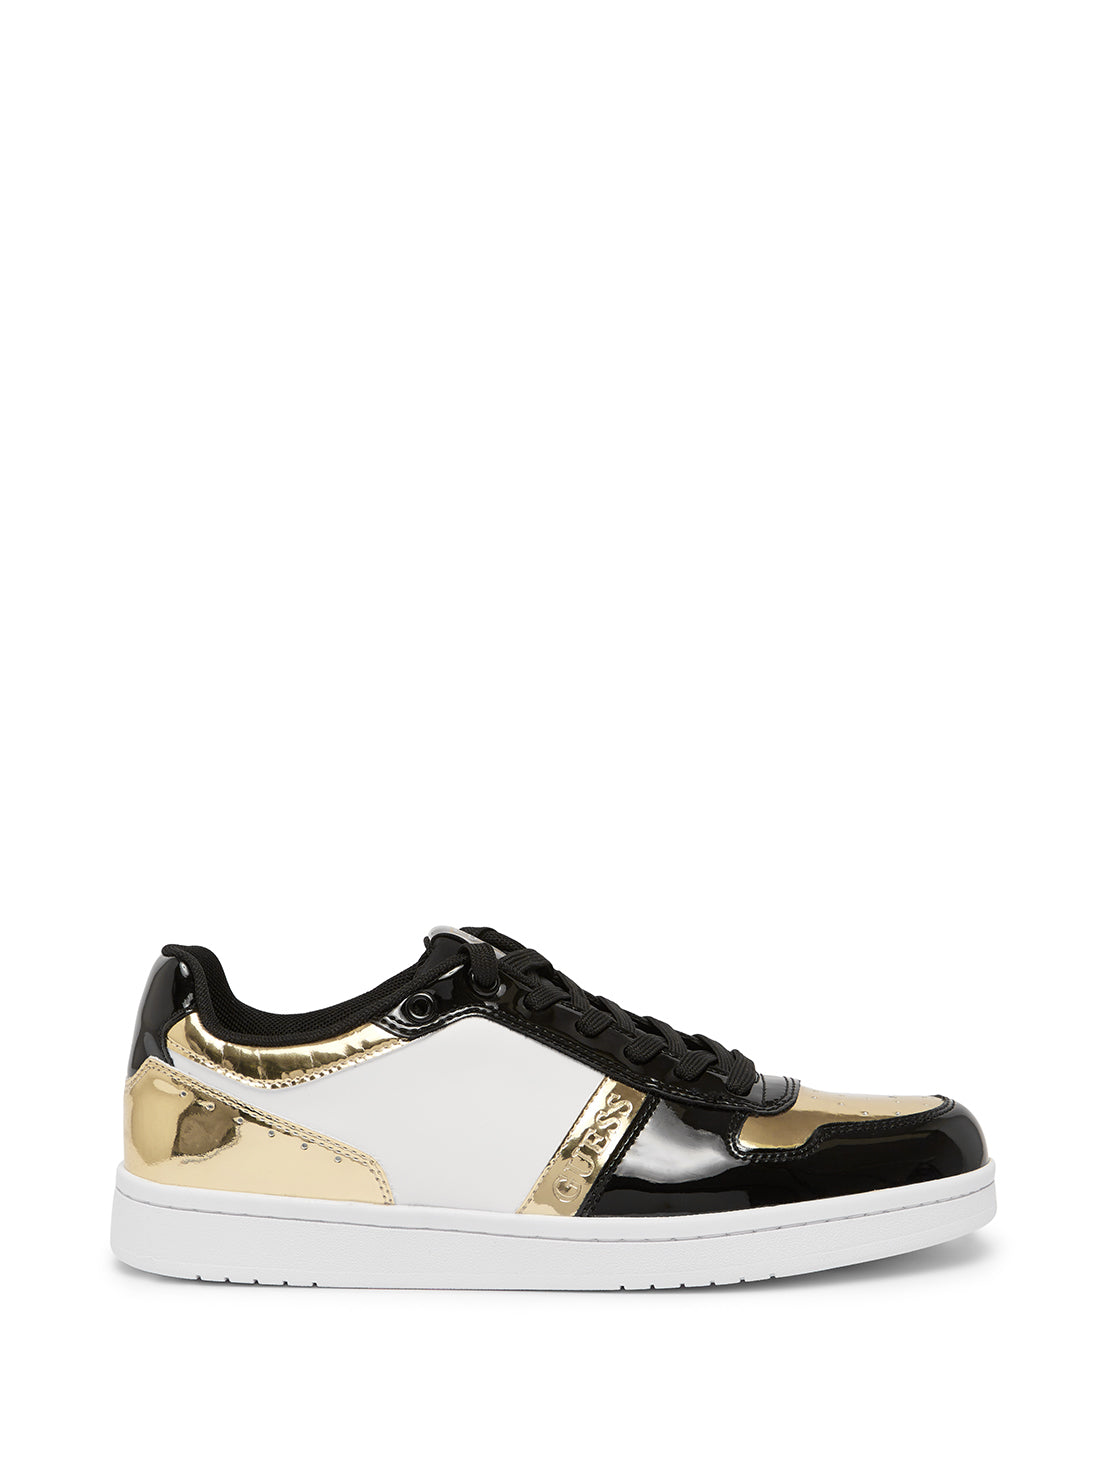 GUESS Men's Leazy Gold Low Top Sneakers LEAZY Side View